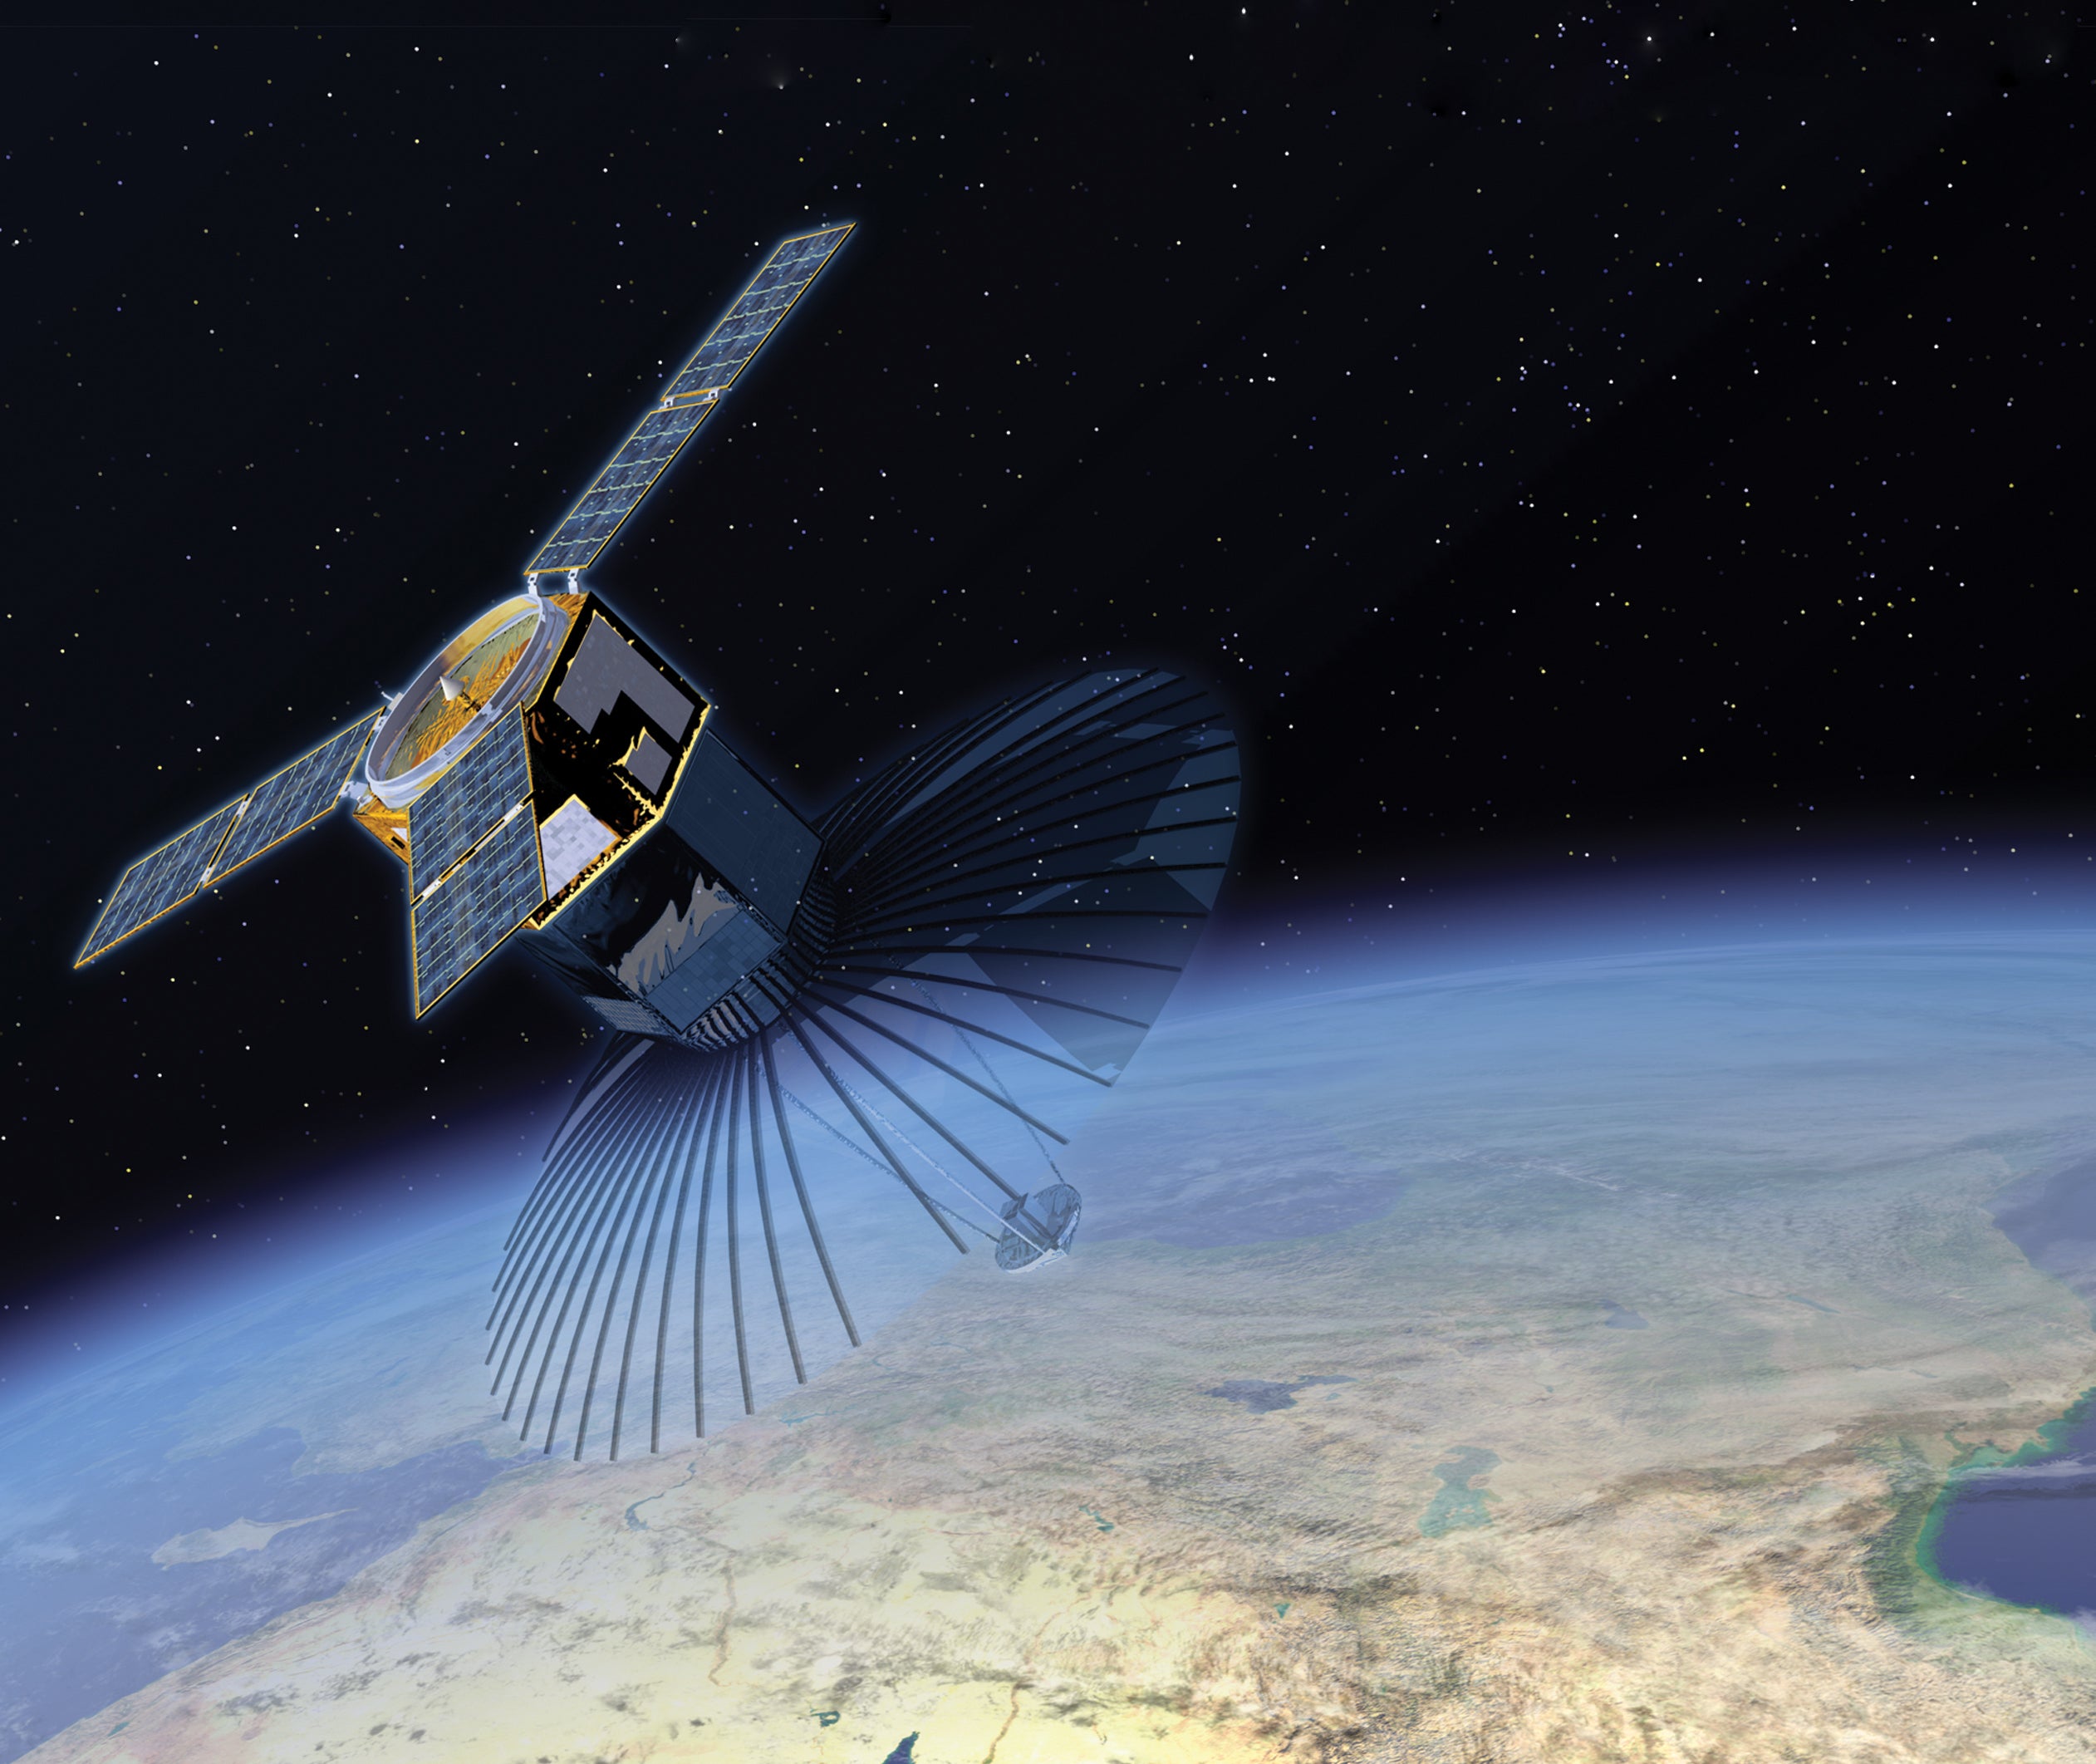 A New Defense Department Satellite Shoots Out Smaller Sats